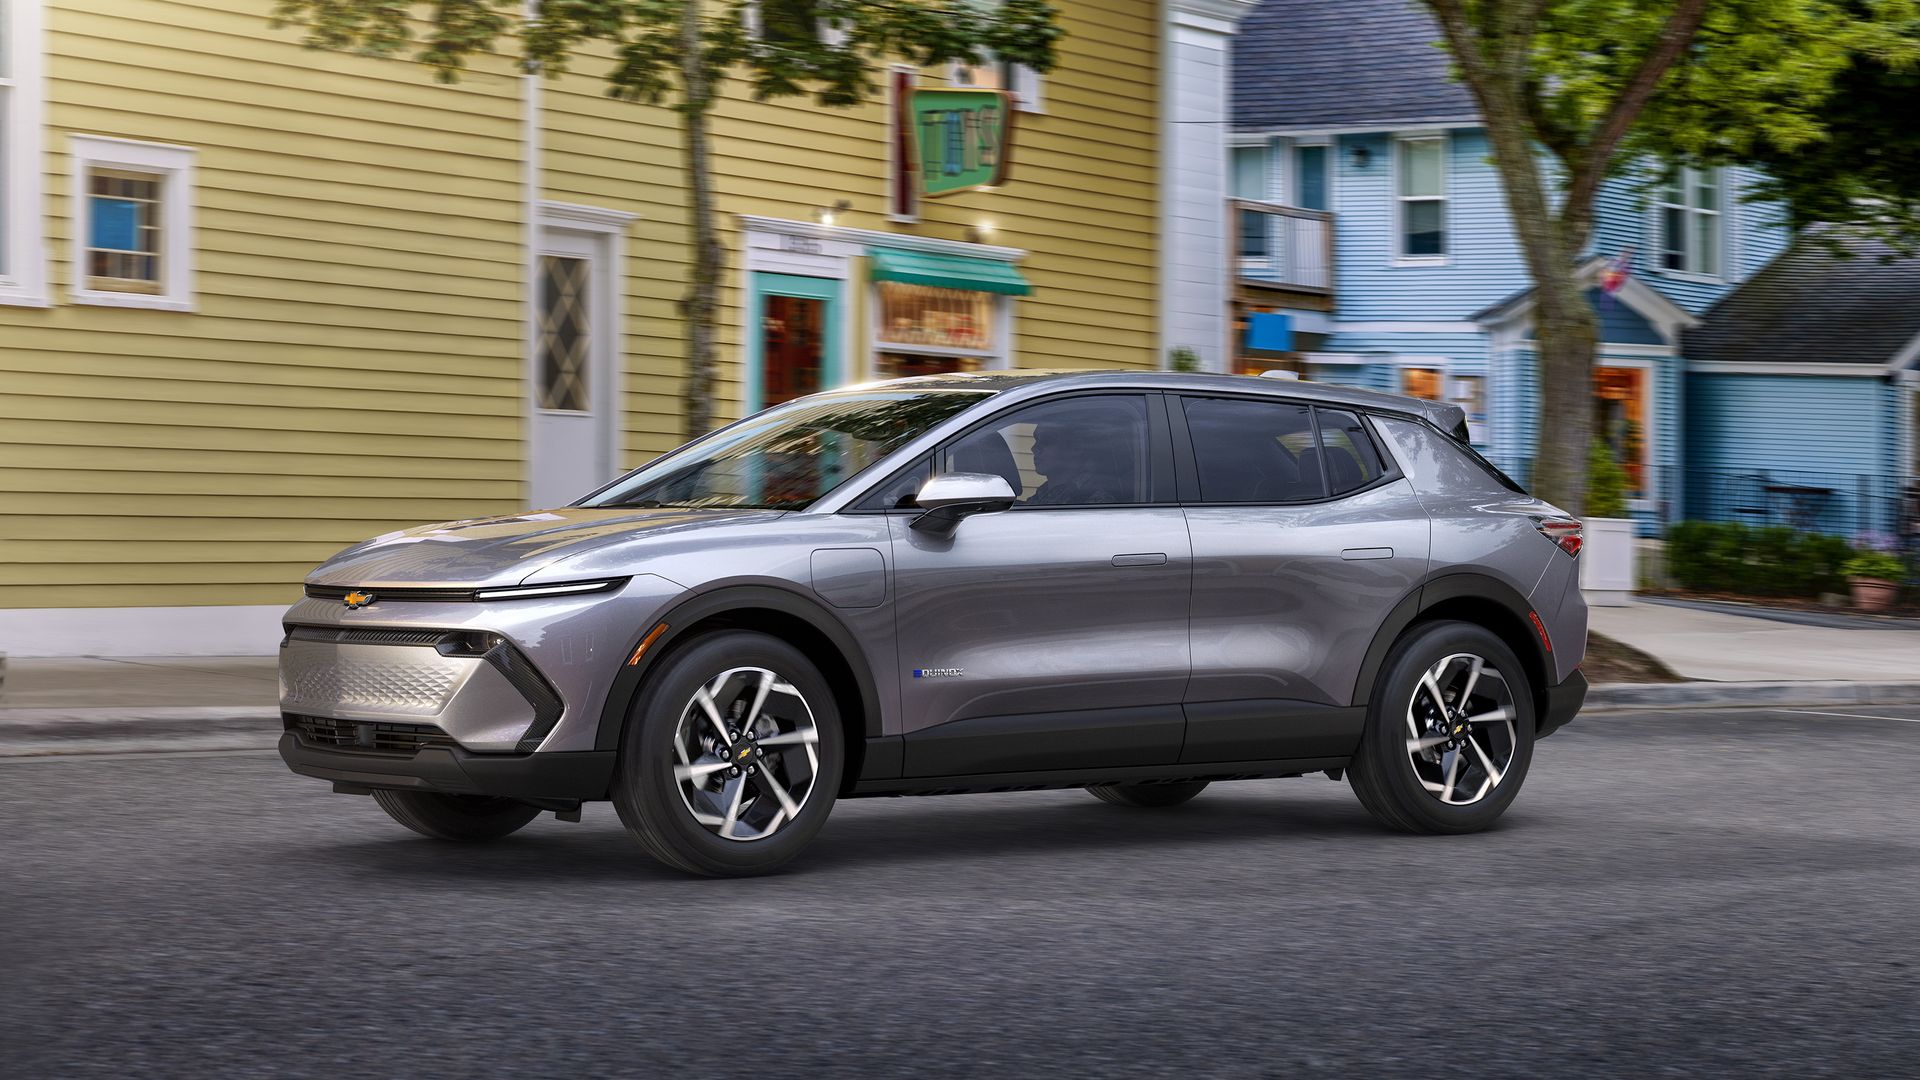 The Chevy Equinox is taking family SUVs electric